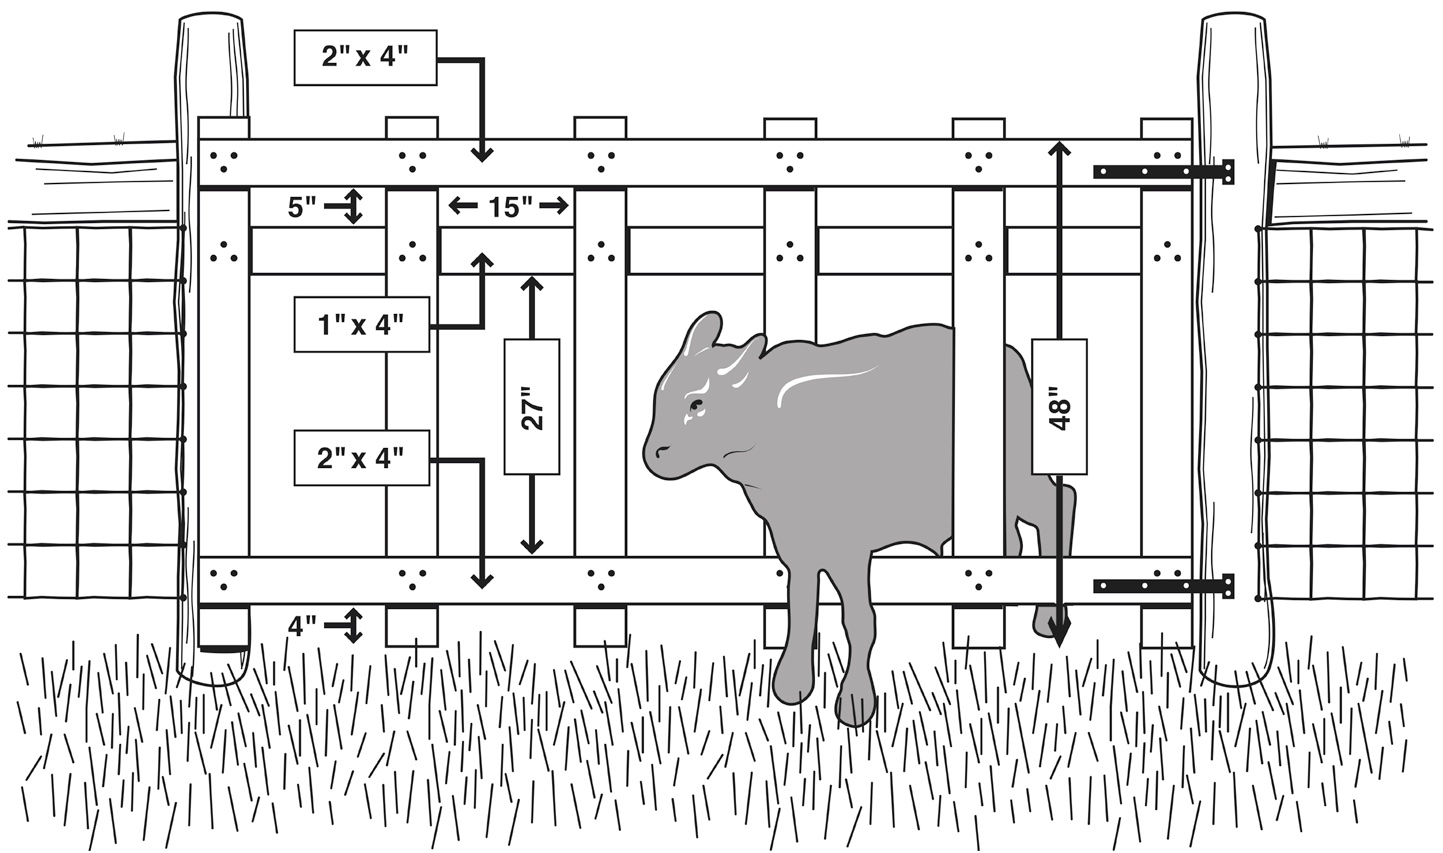 Fig. 02: Diagram of a 12-foot creep gate to allow smaller animals (up to 700 lb) access to higher-quality forage areas.